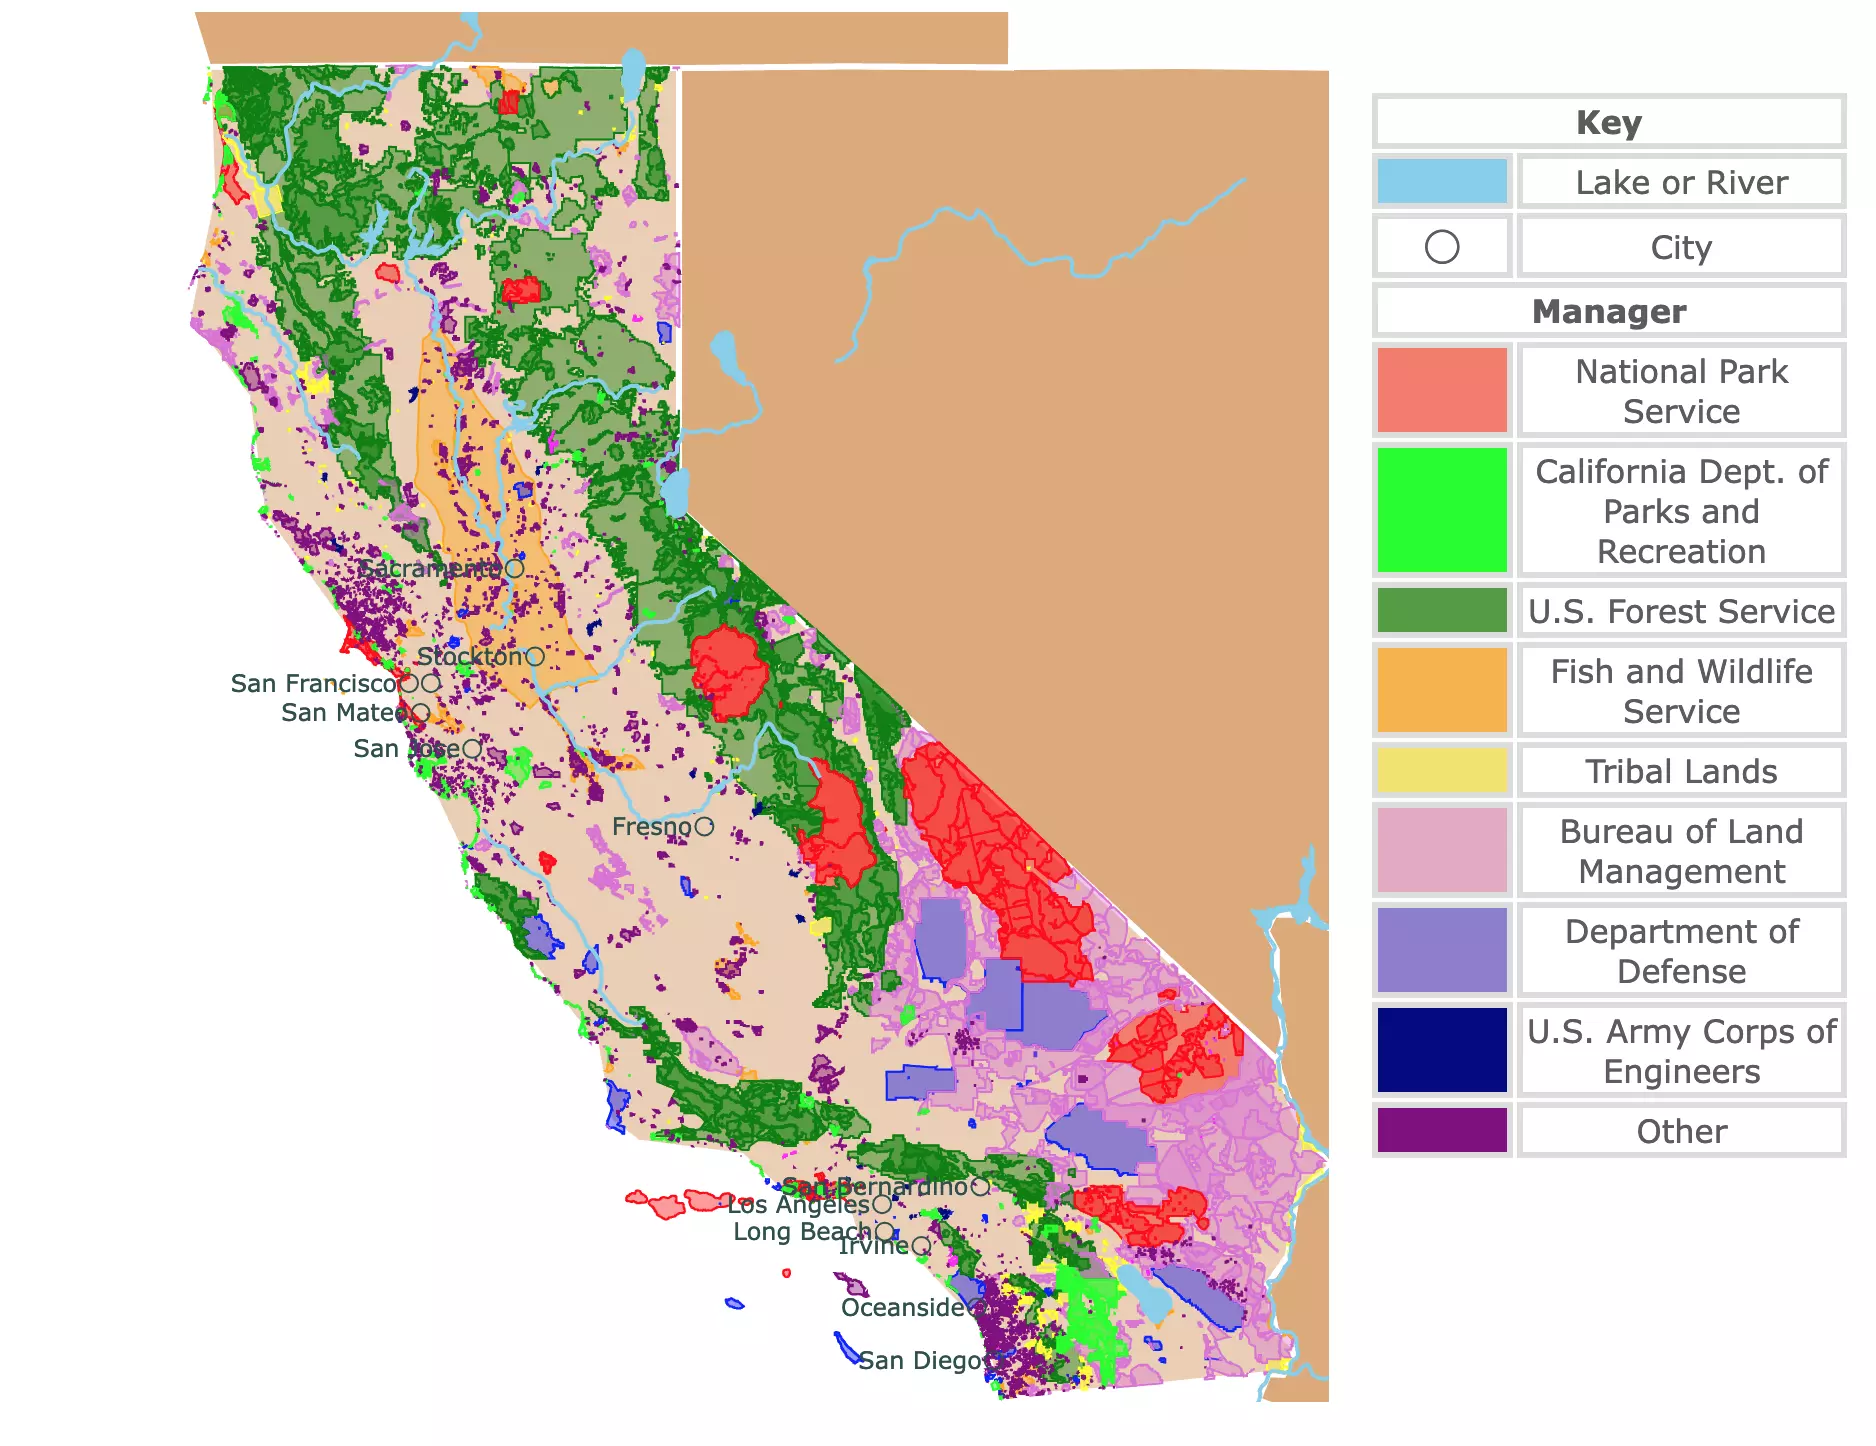 Map of California's state parks, national parks, forests, and public lands areas